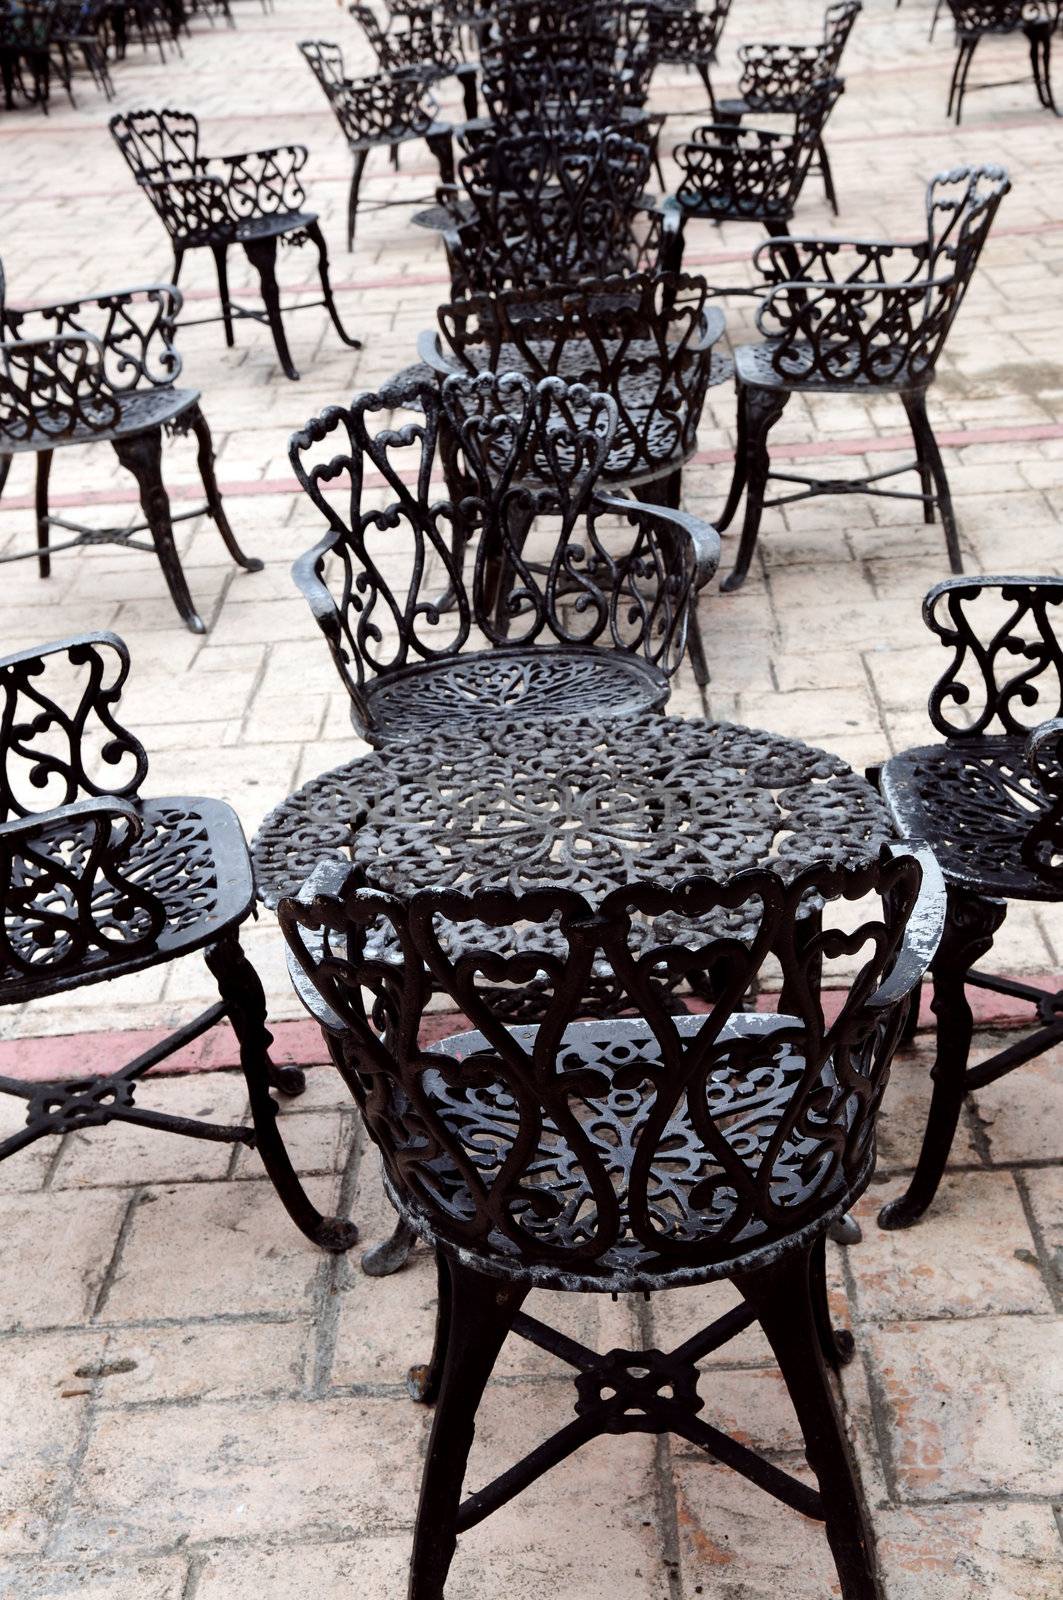 Wrought iron furniture by elenathewise